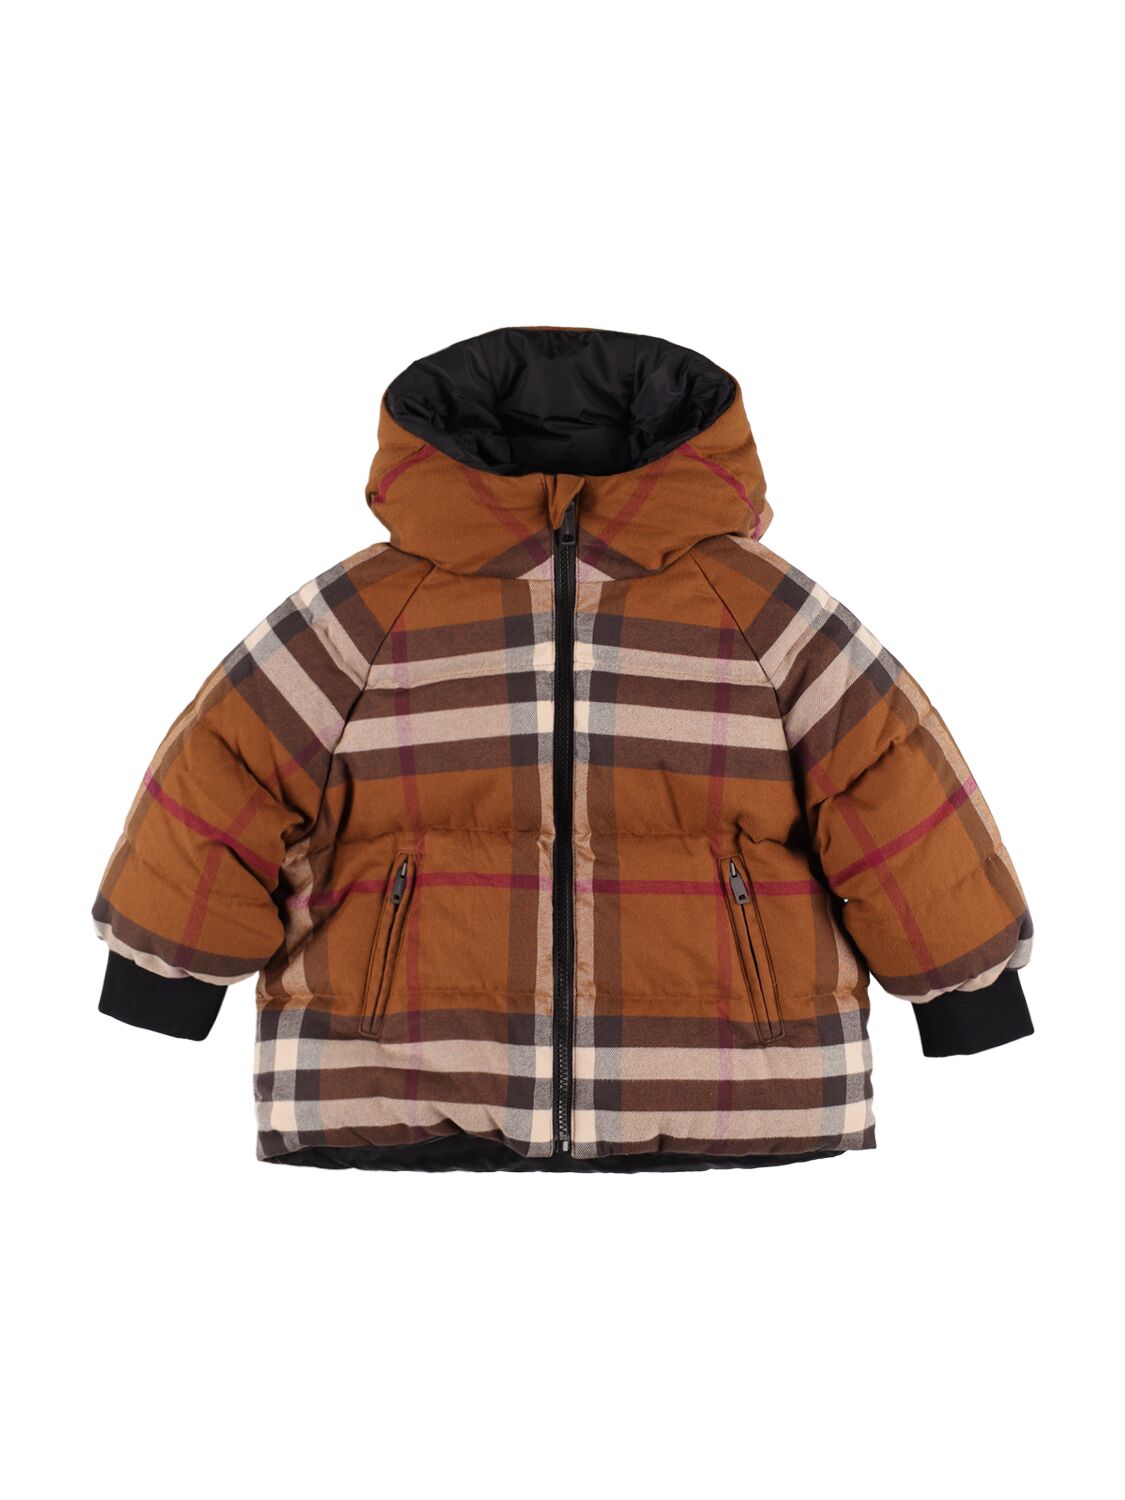 Burberry Kids' Check Print Quilted Cotton Down Jacket